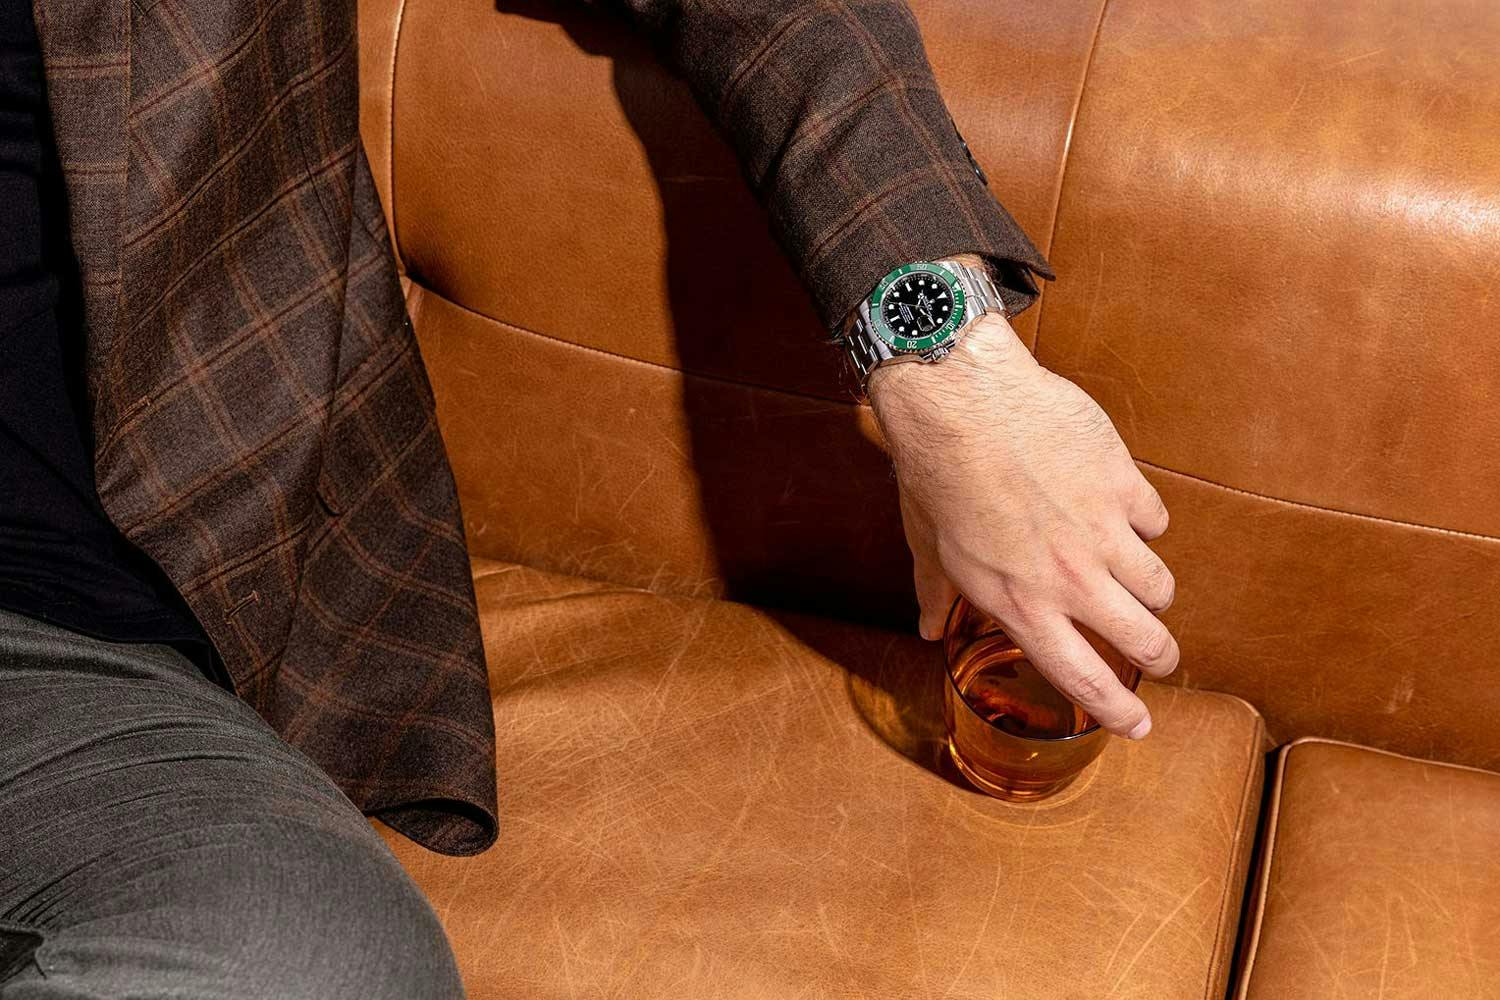 man wearing Rolex sitting on leather couch